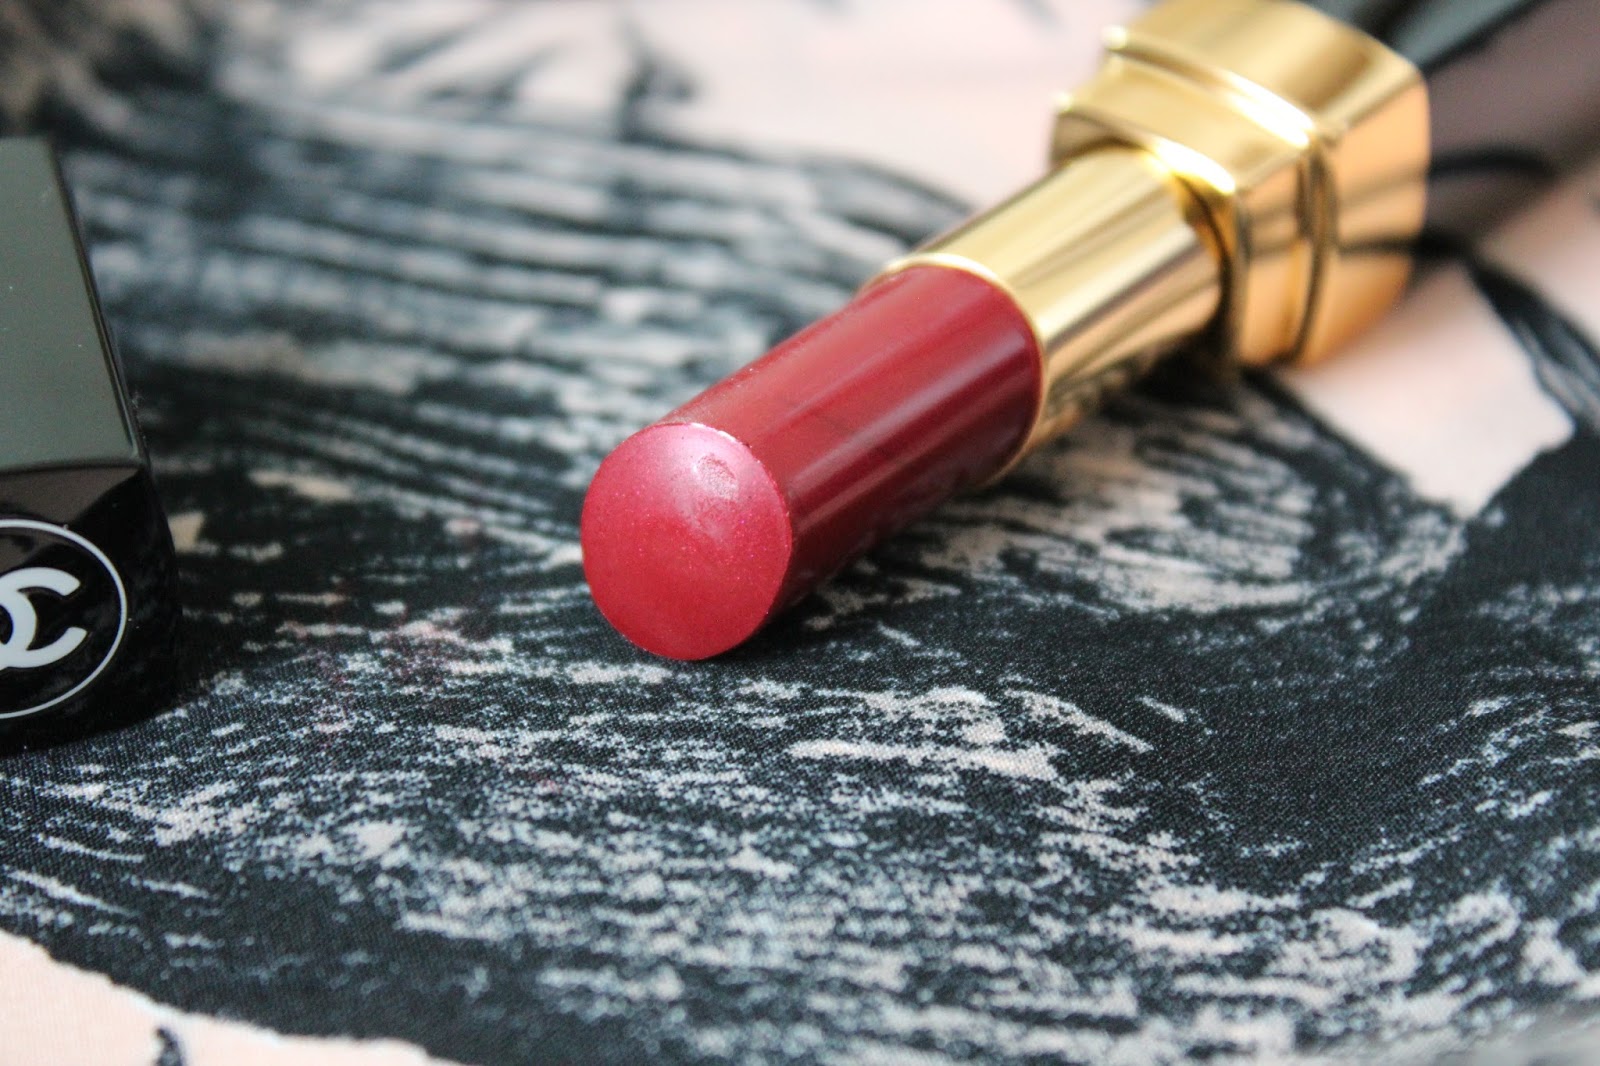 Lippy of the week: Chanel Rouge Coco Shine in #112 Téméraire